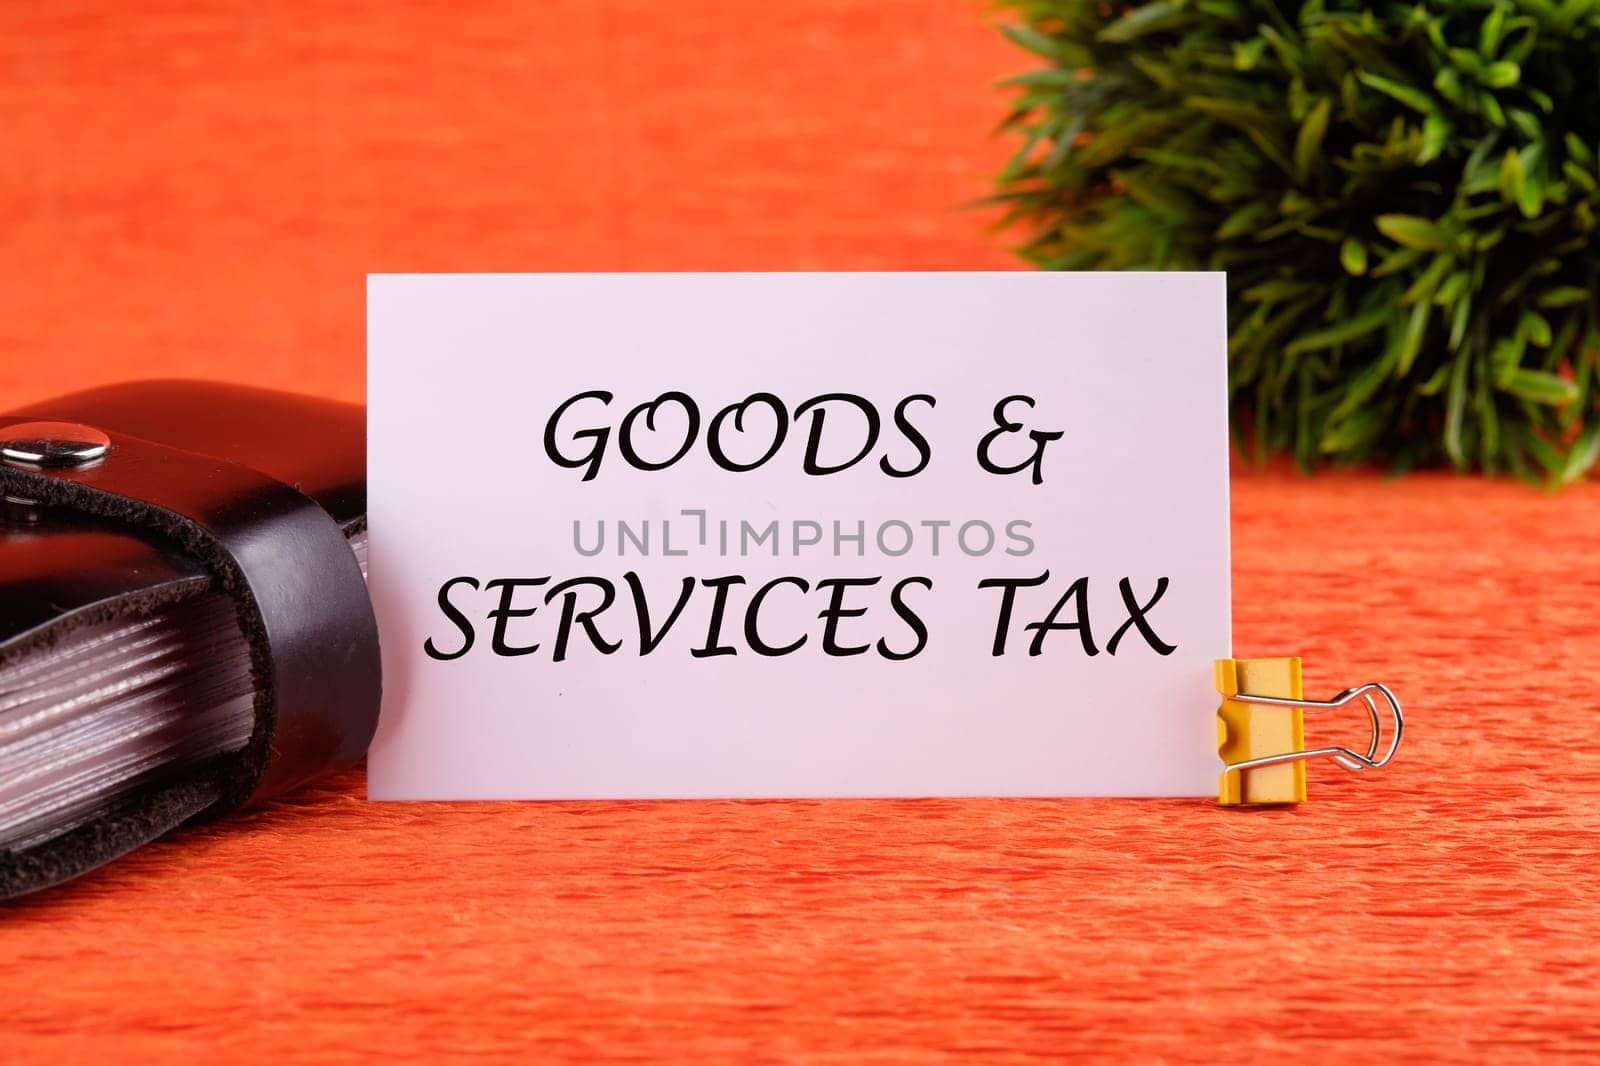 Goods and services and tax text written on a white card near the business card holder in black on an orange background